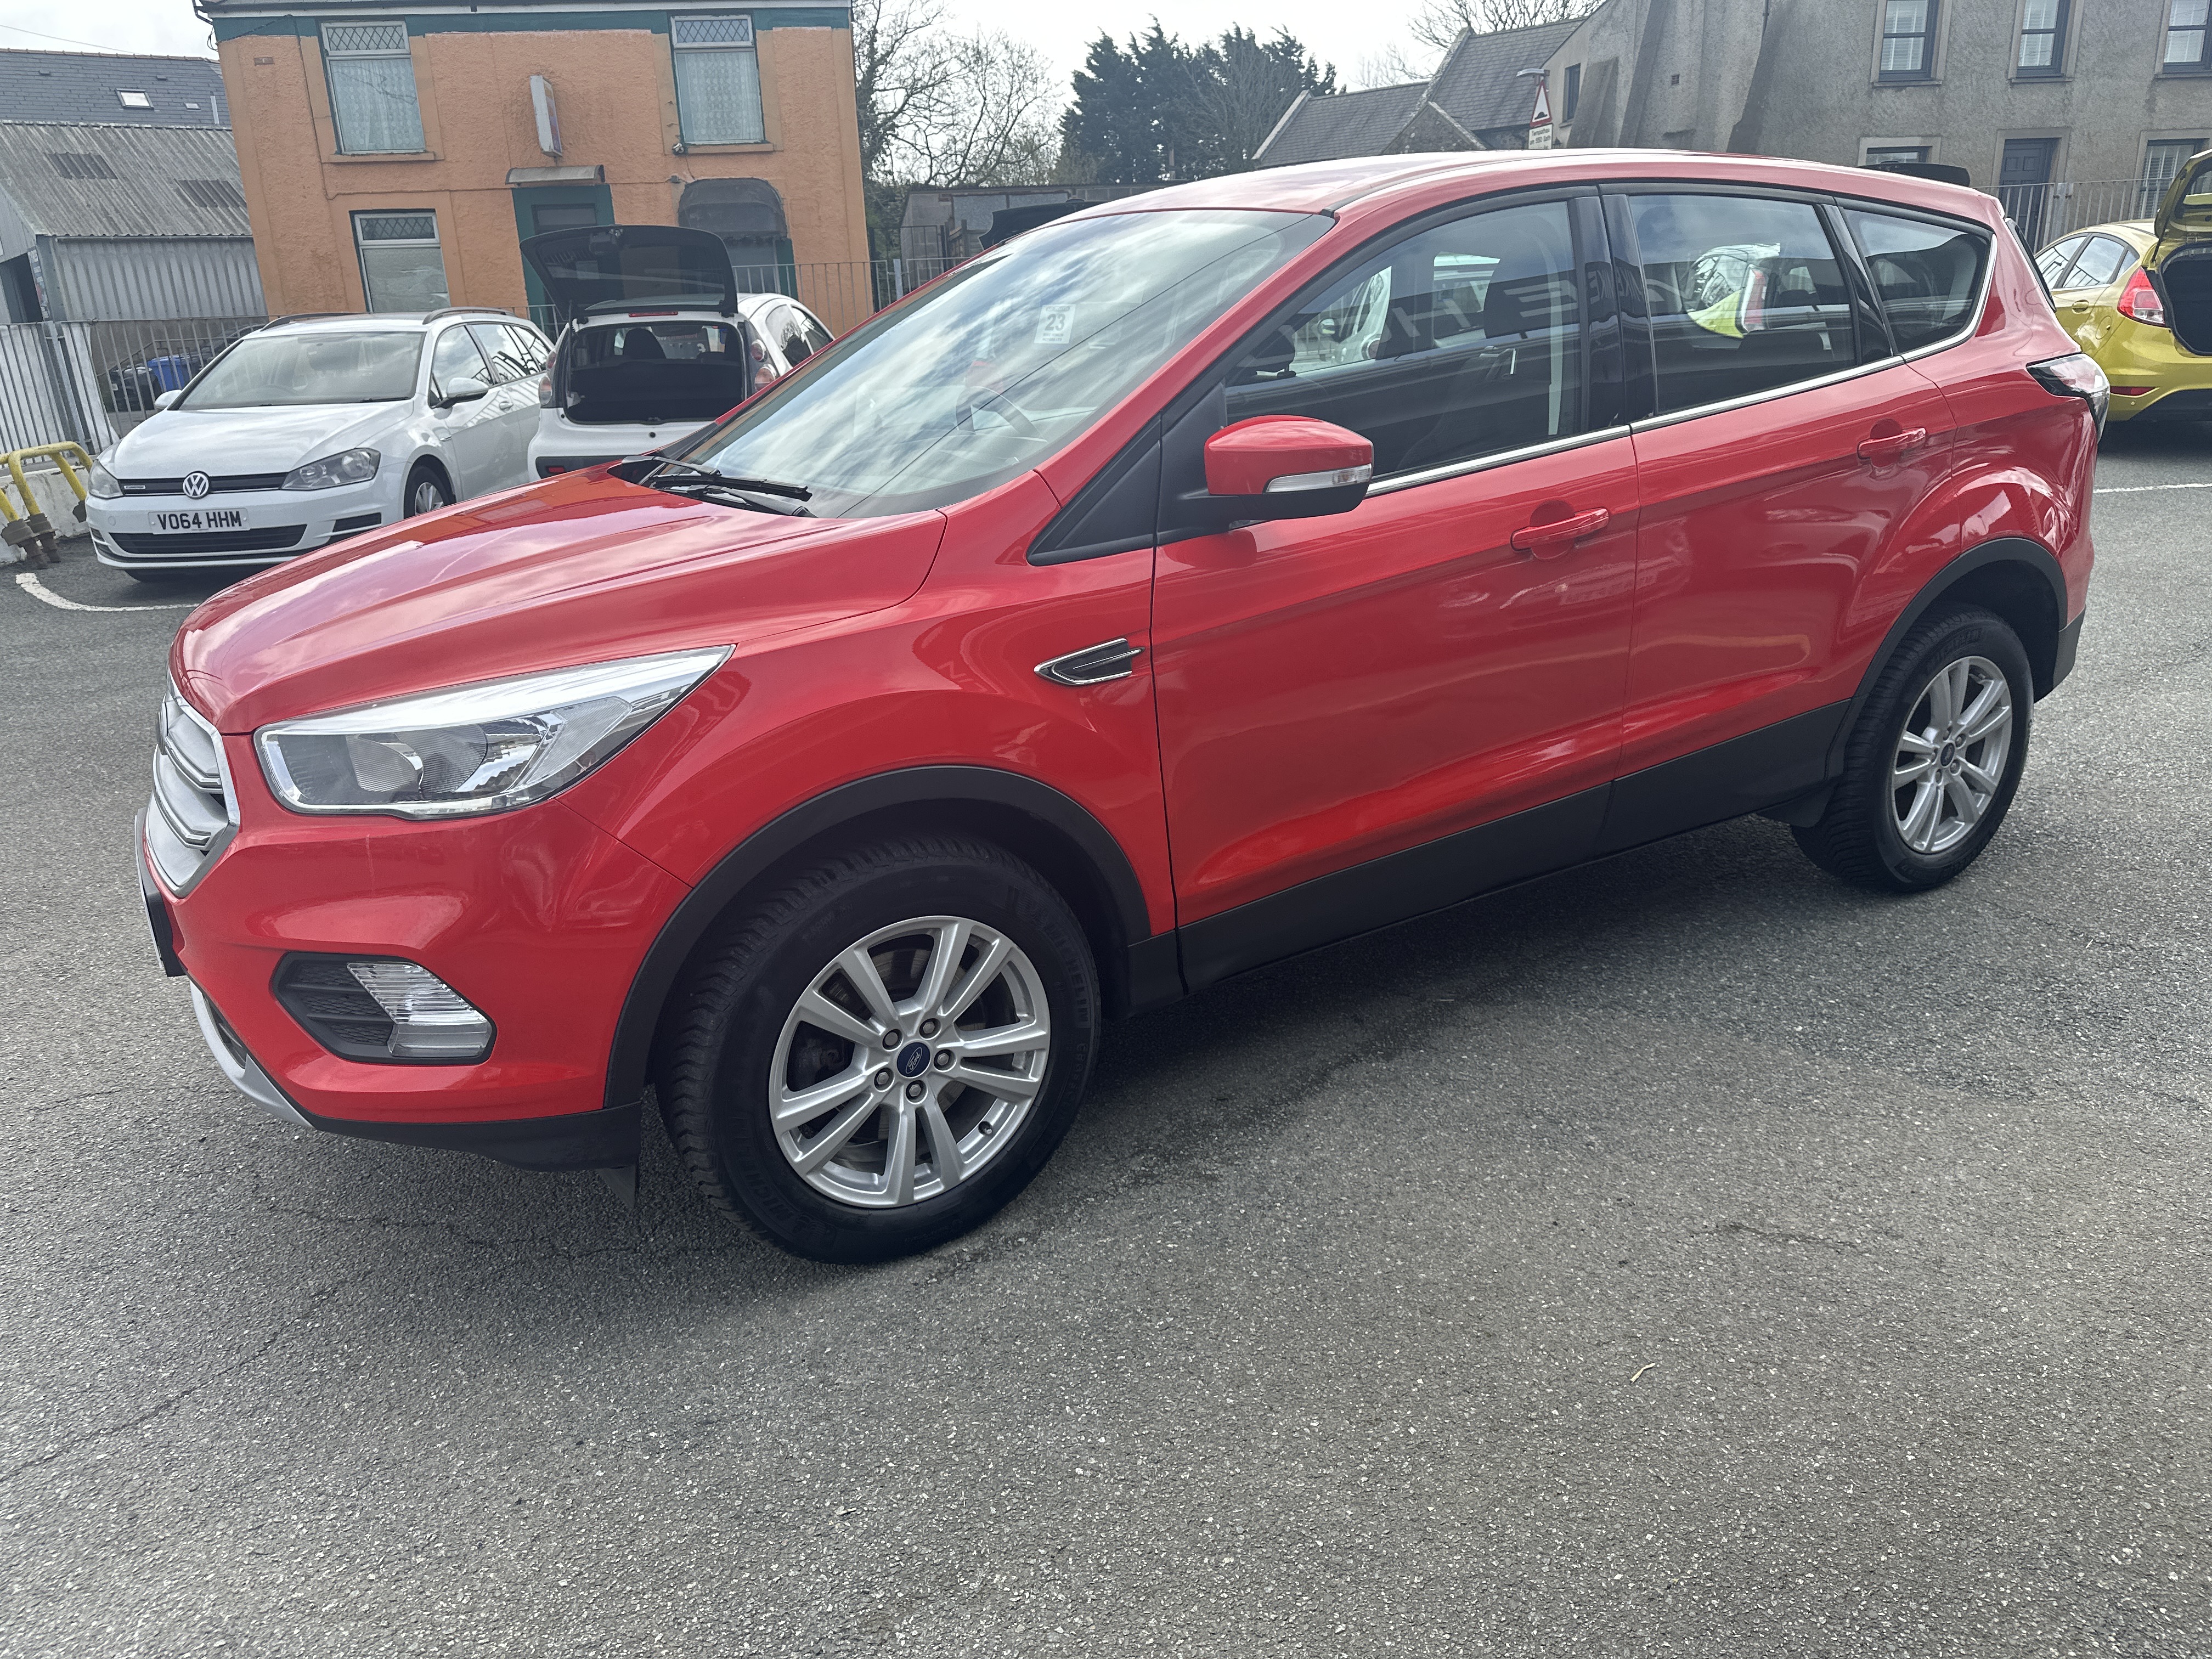 Ford KUGA ZETEC TDCI 4x4 for sale at Mike Howlin Motor Sales Pembrokeshire